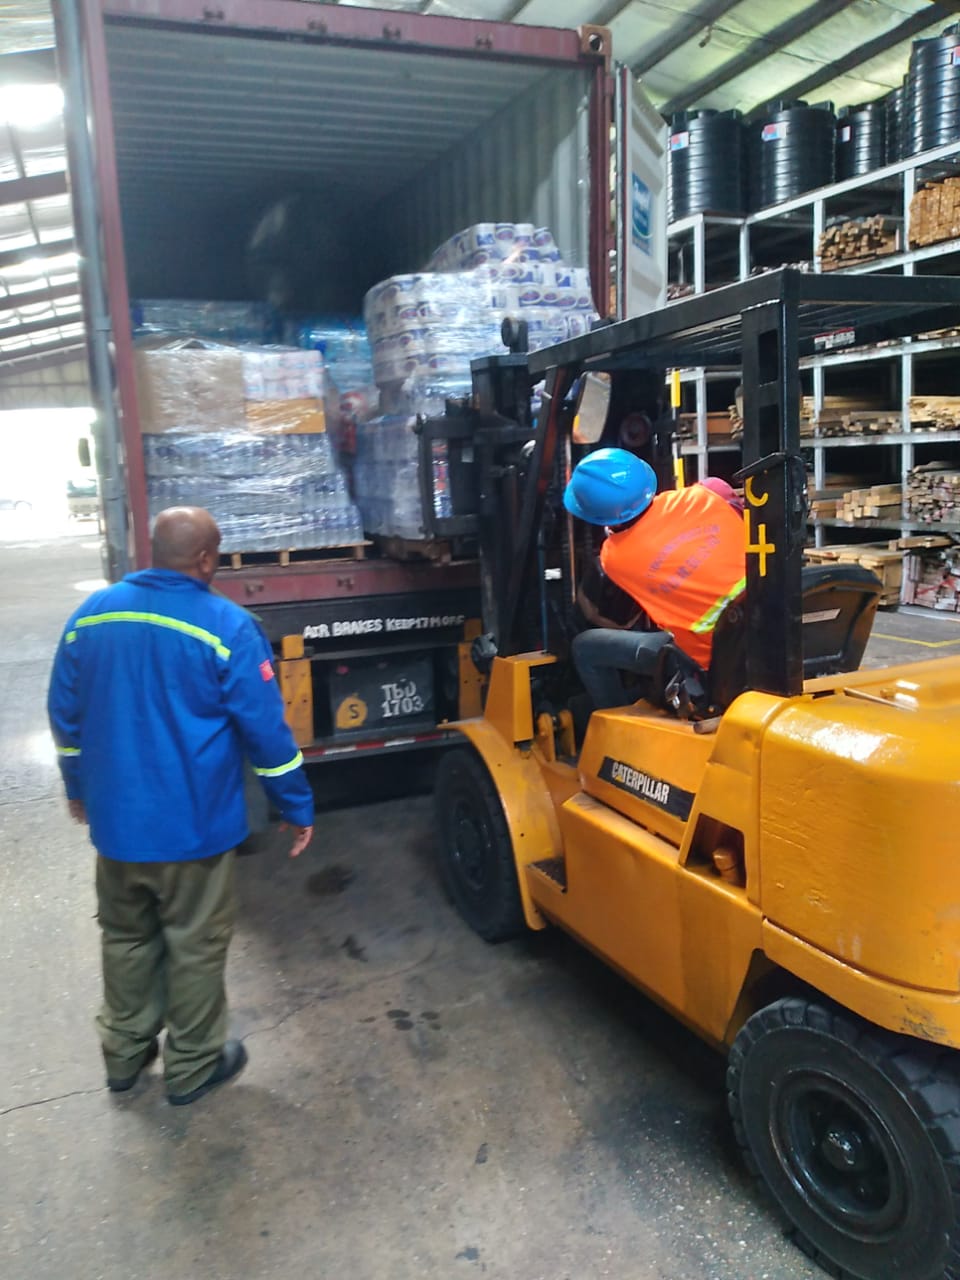 Bhagwansingh dispatched a container with water, food items and medical supplies to SVG